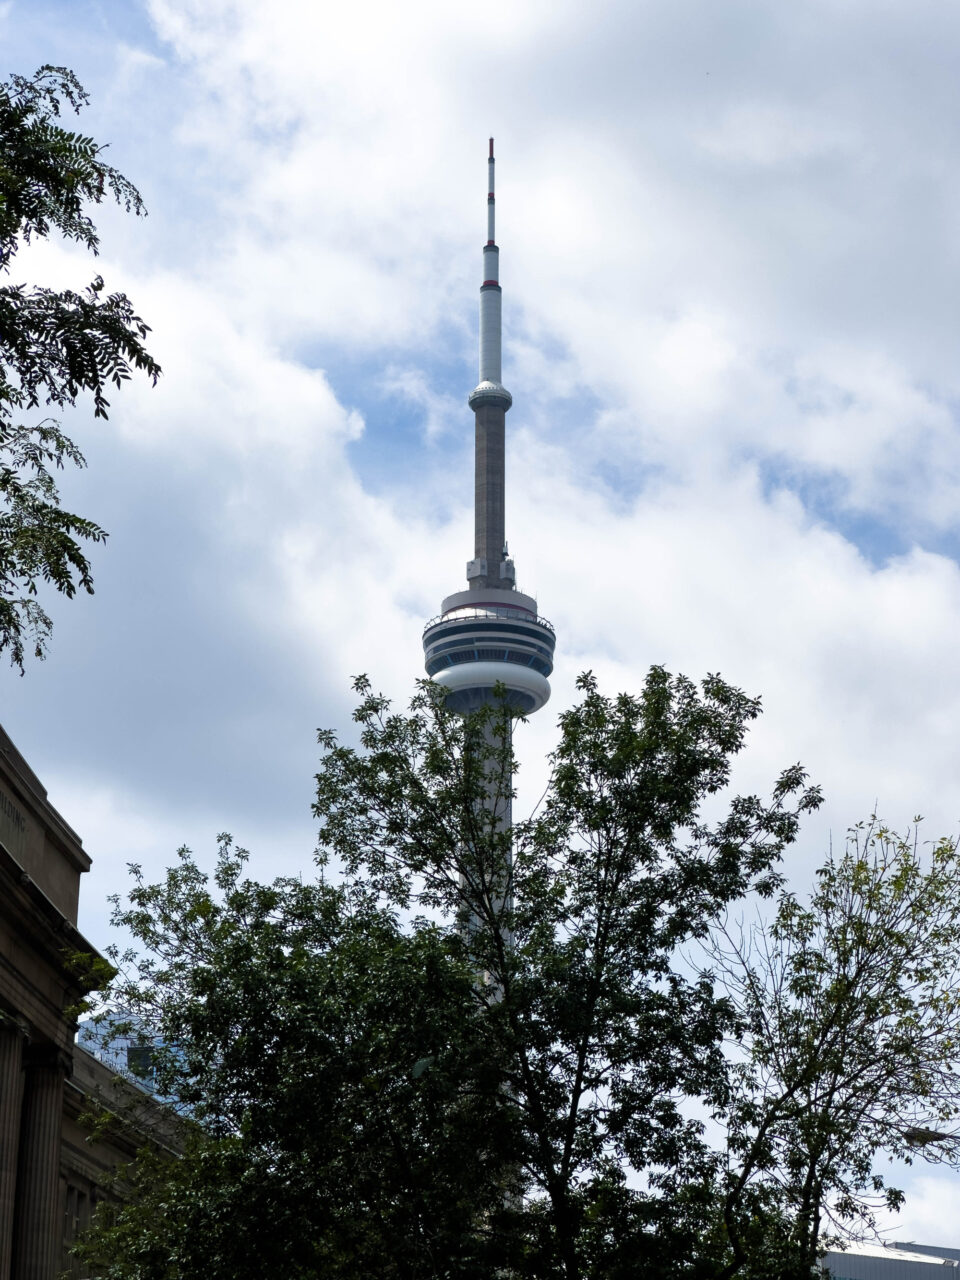 The view of the Toronto Tower, Ontario.